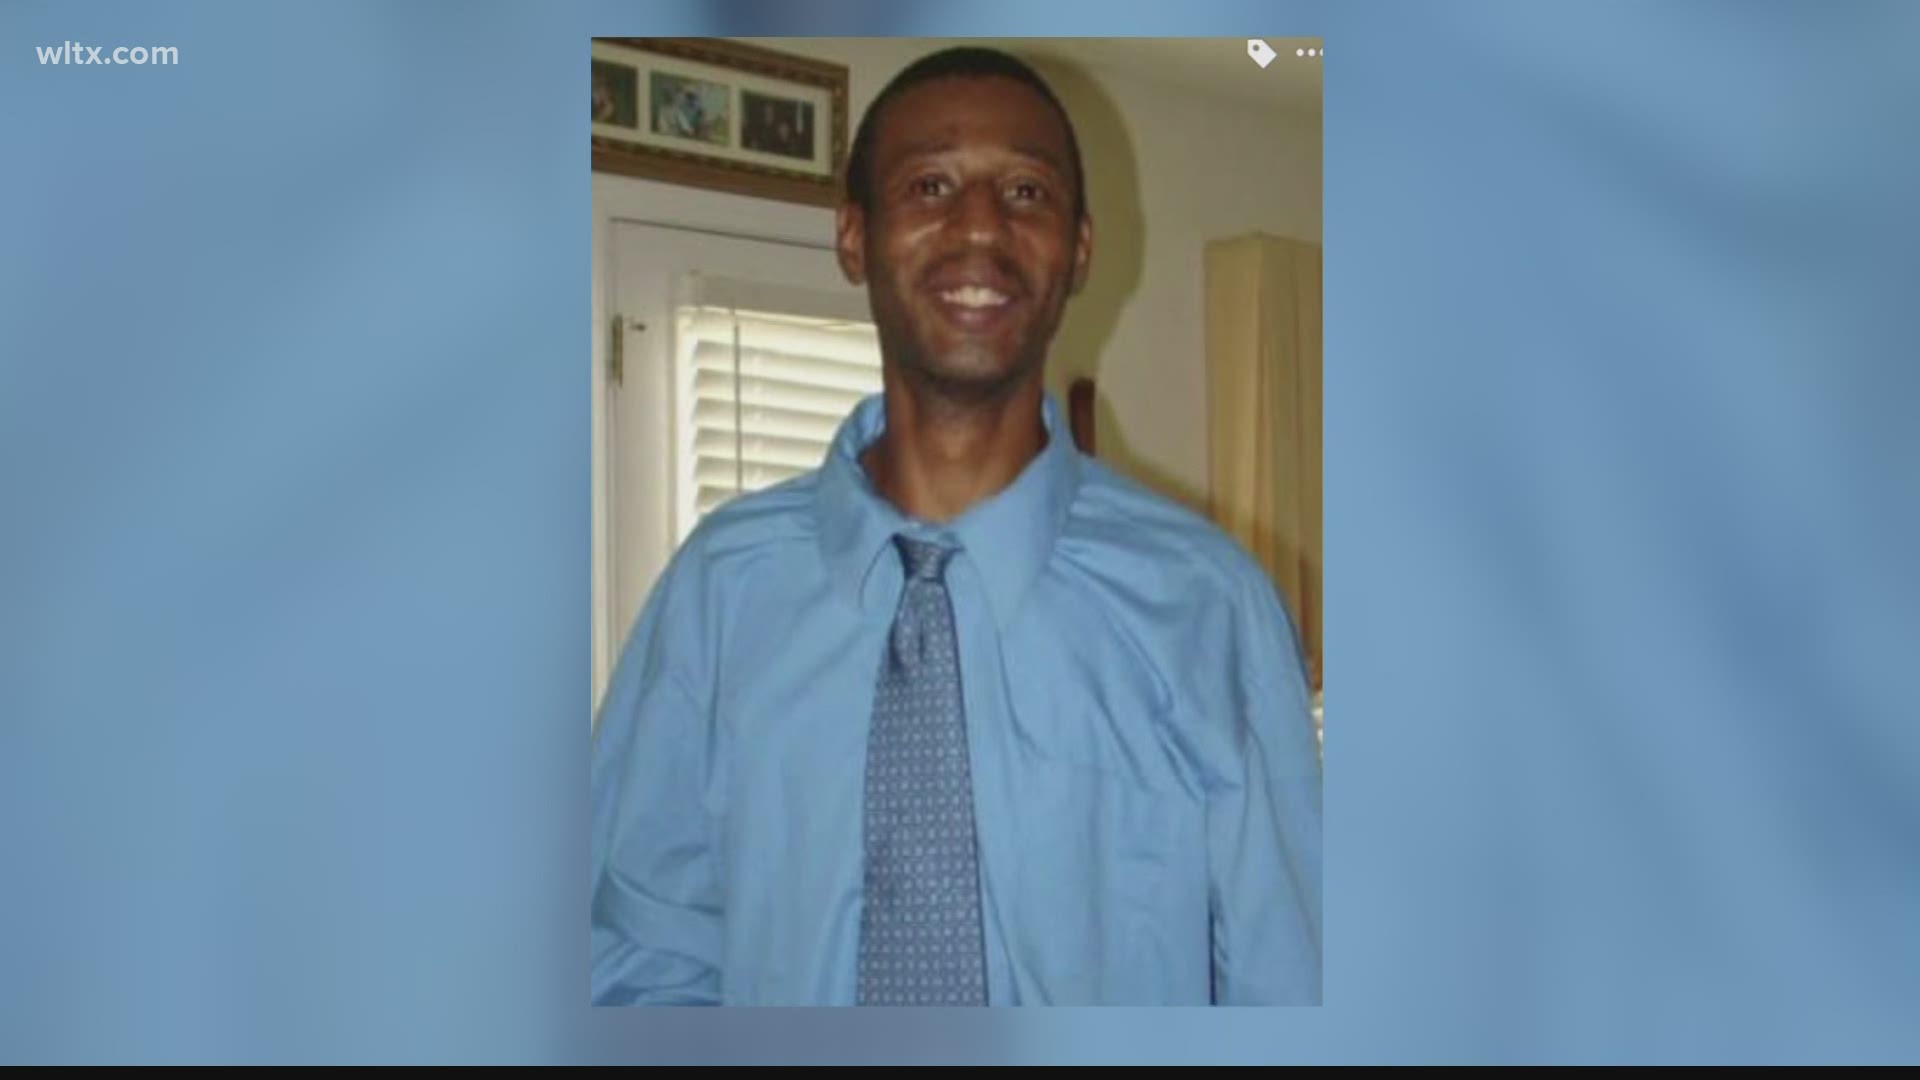 Clyde Mcgee was struck around 6 AM on March 15th of last year while he was walking to work.  The person who struck and killed him has not been found.